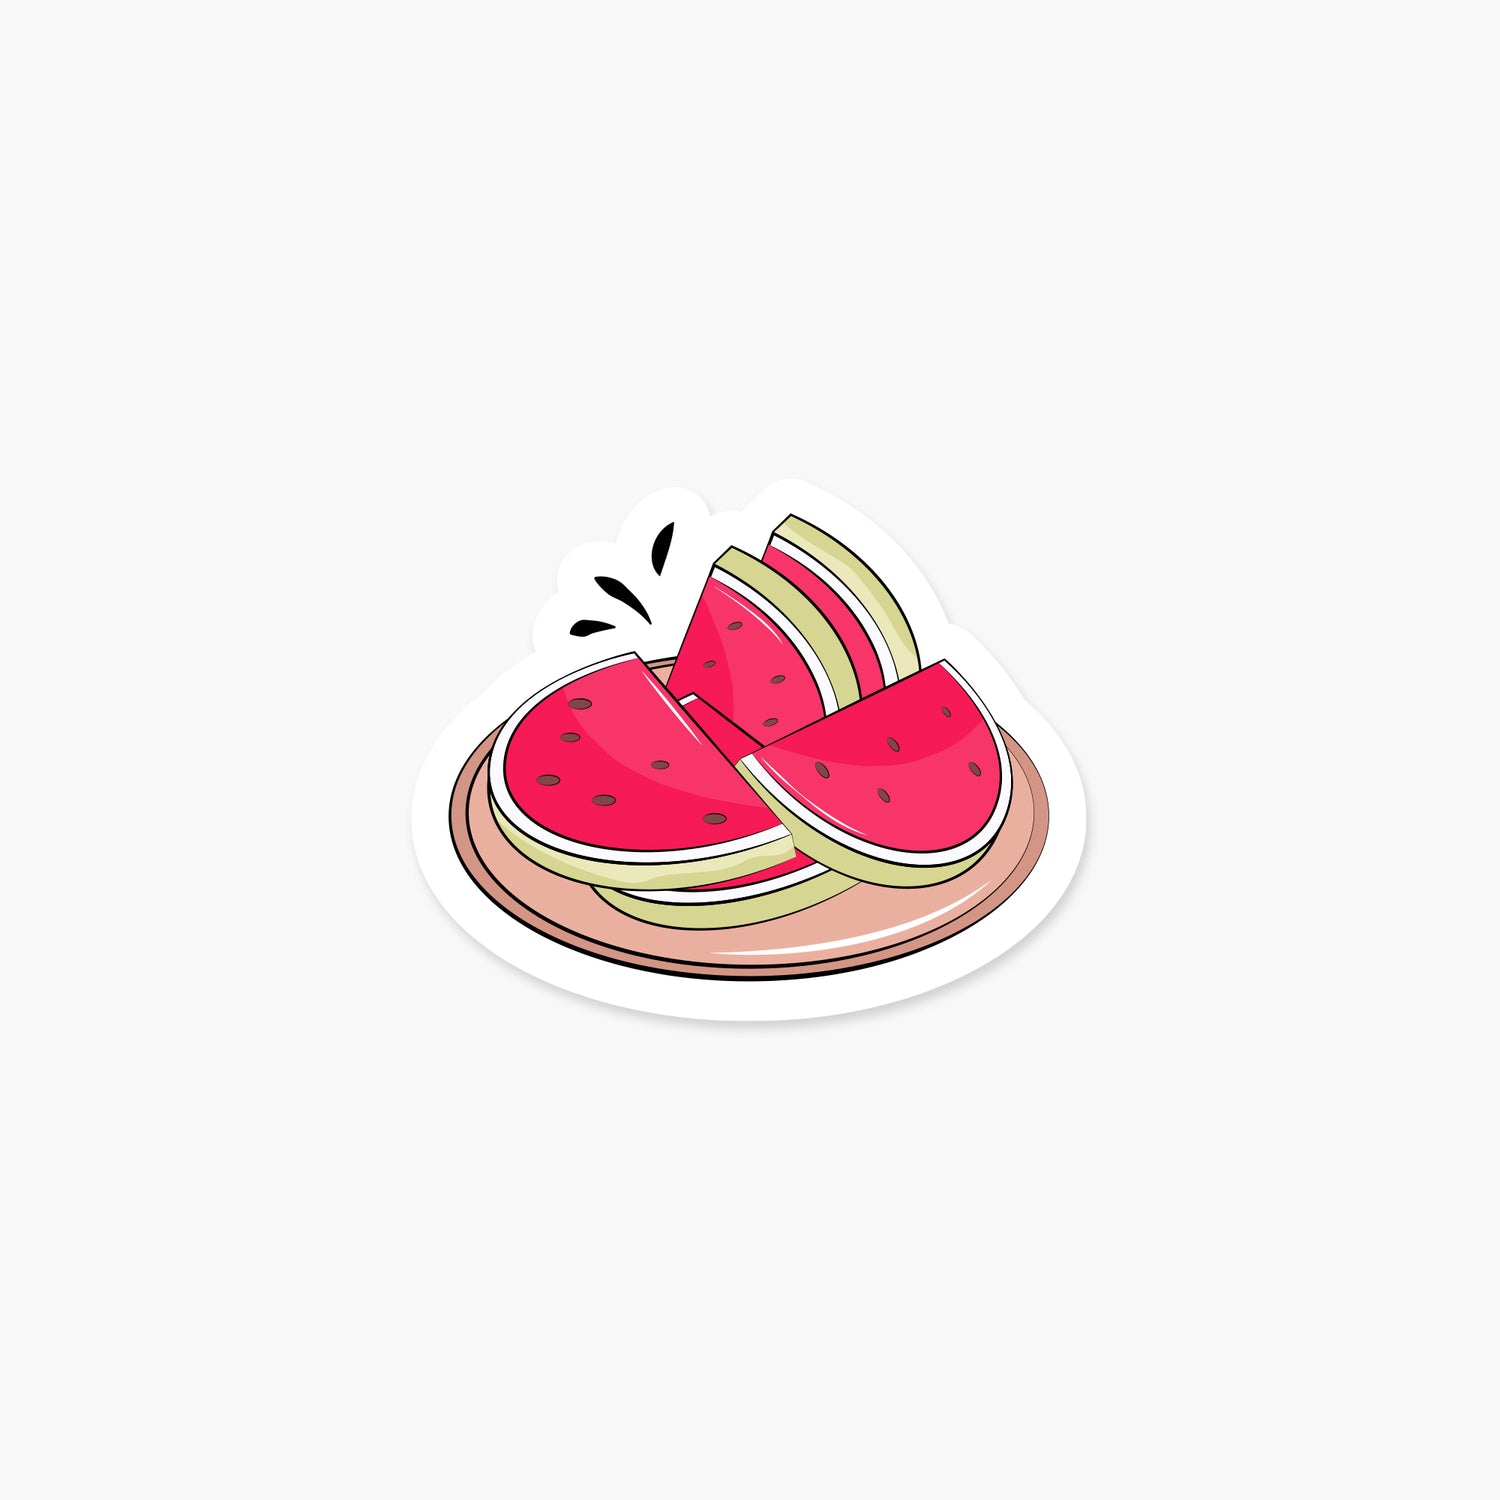 Plate of Watermelon - Summer Sticker | Footnotes Paper